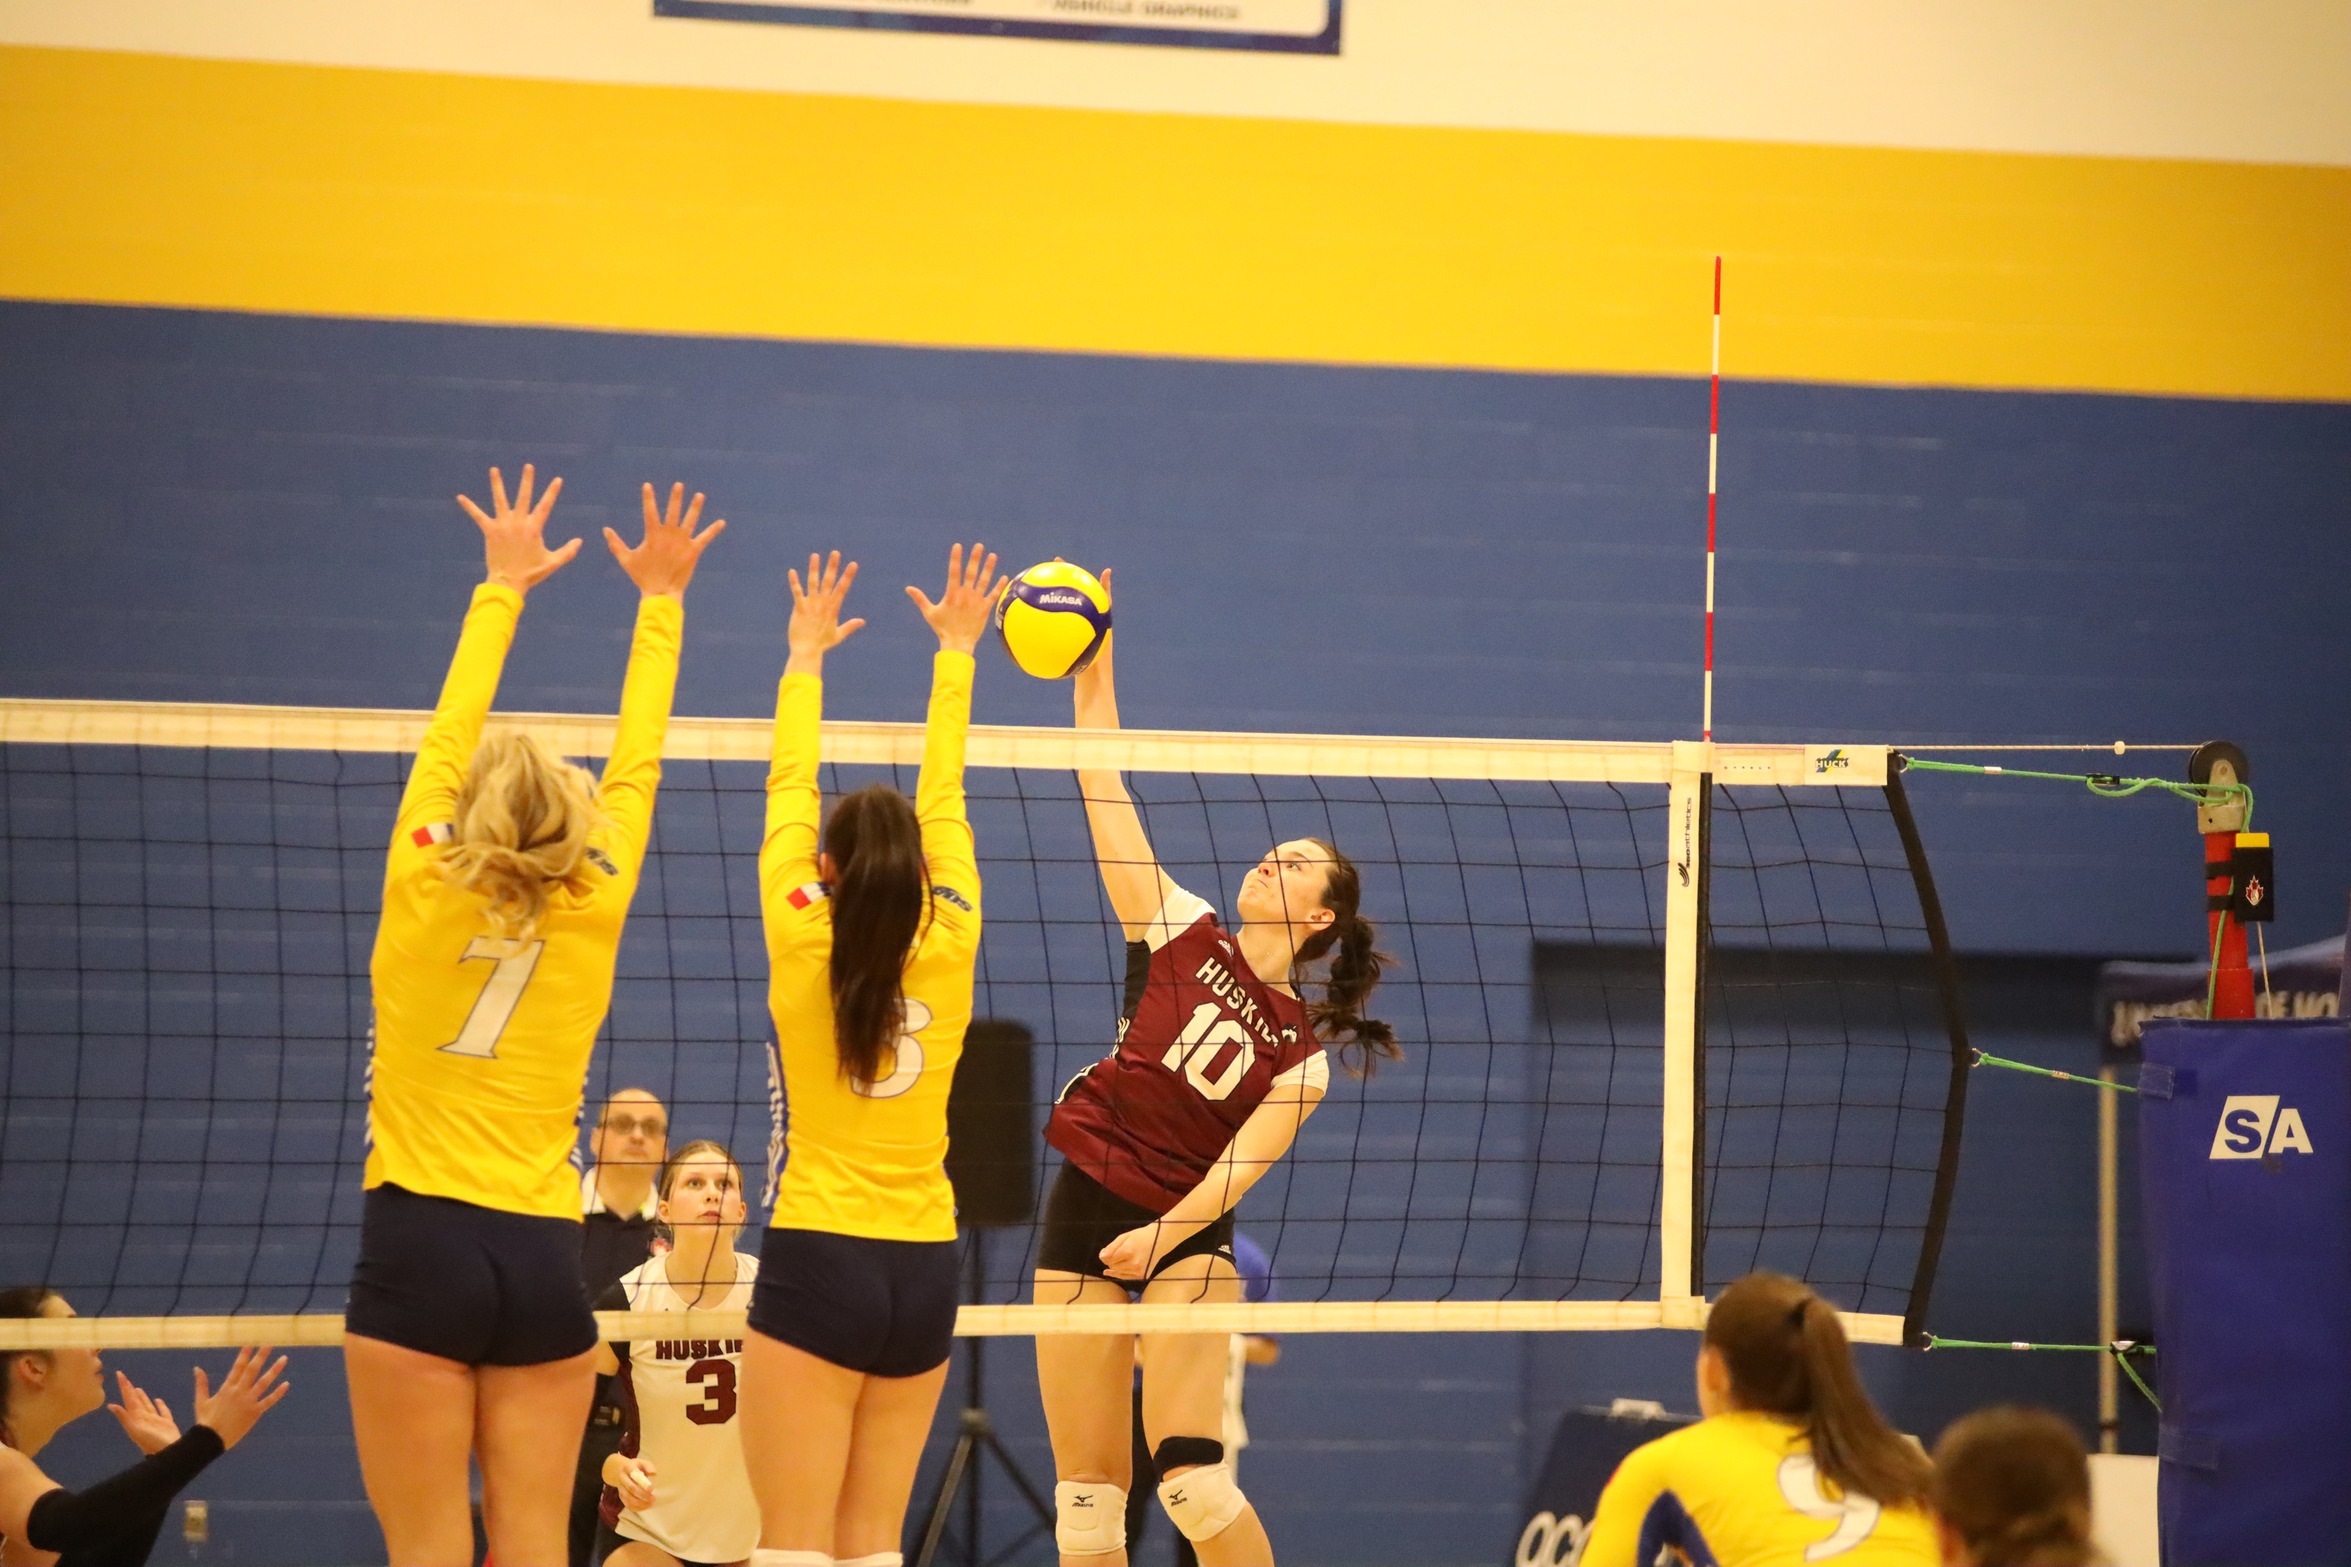 Huskies defeat Aigles Bleues in straight sets, strengthen playoff position